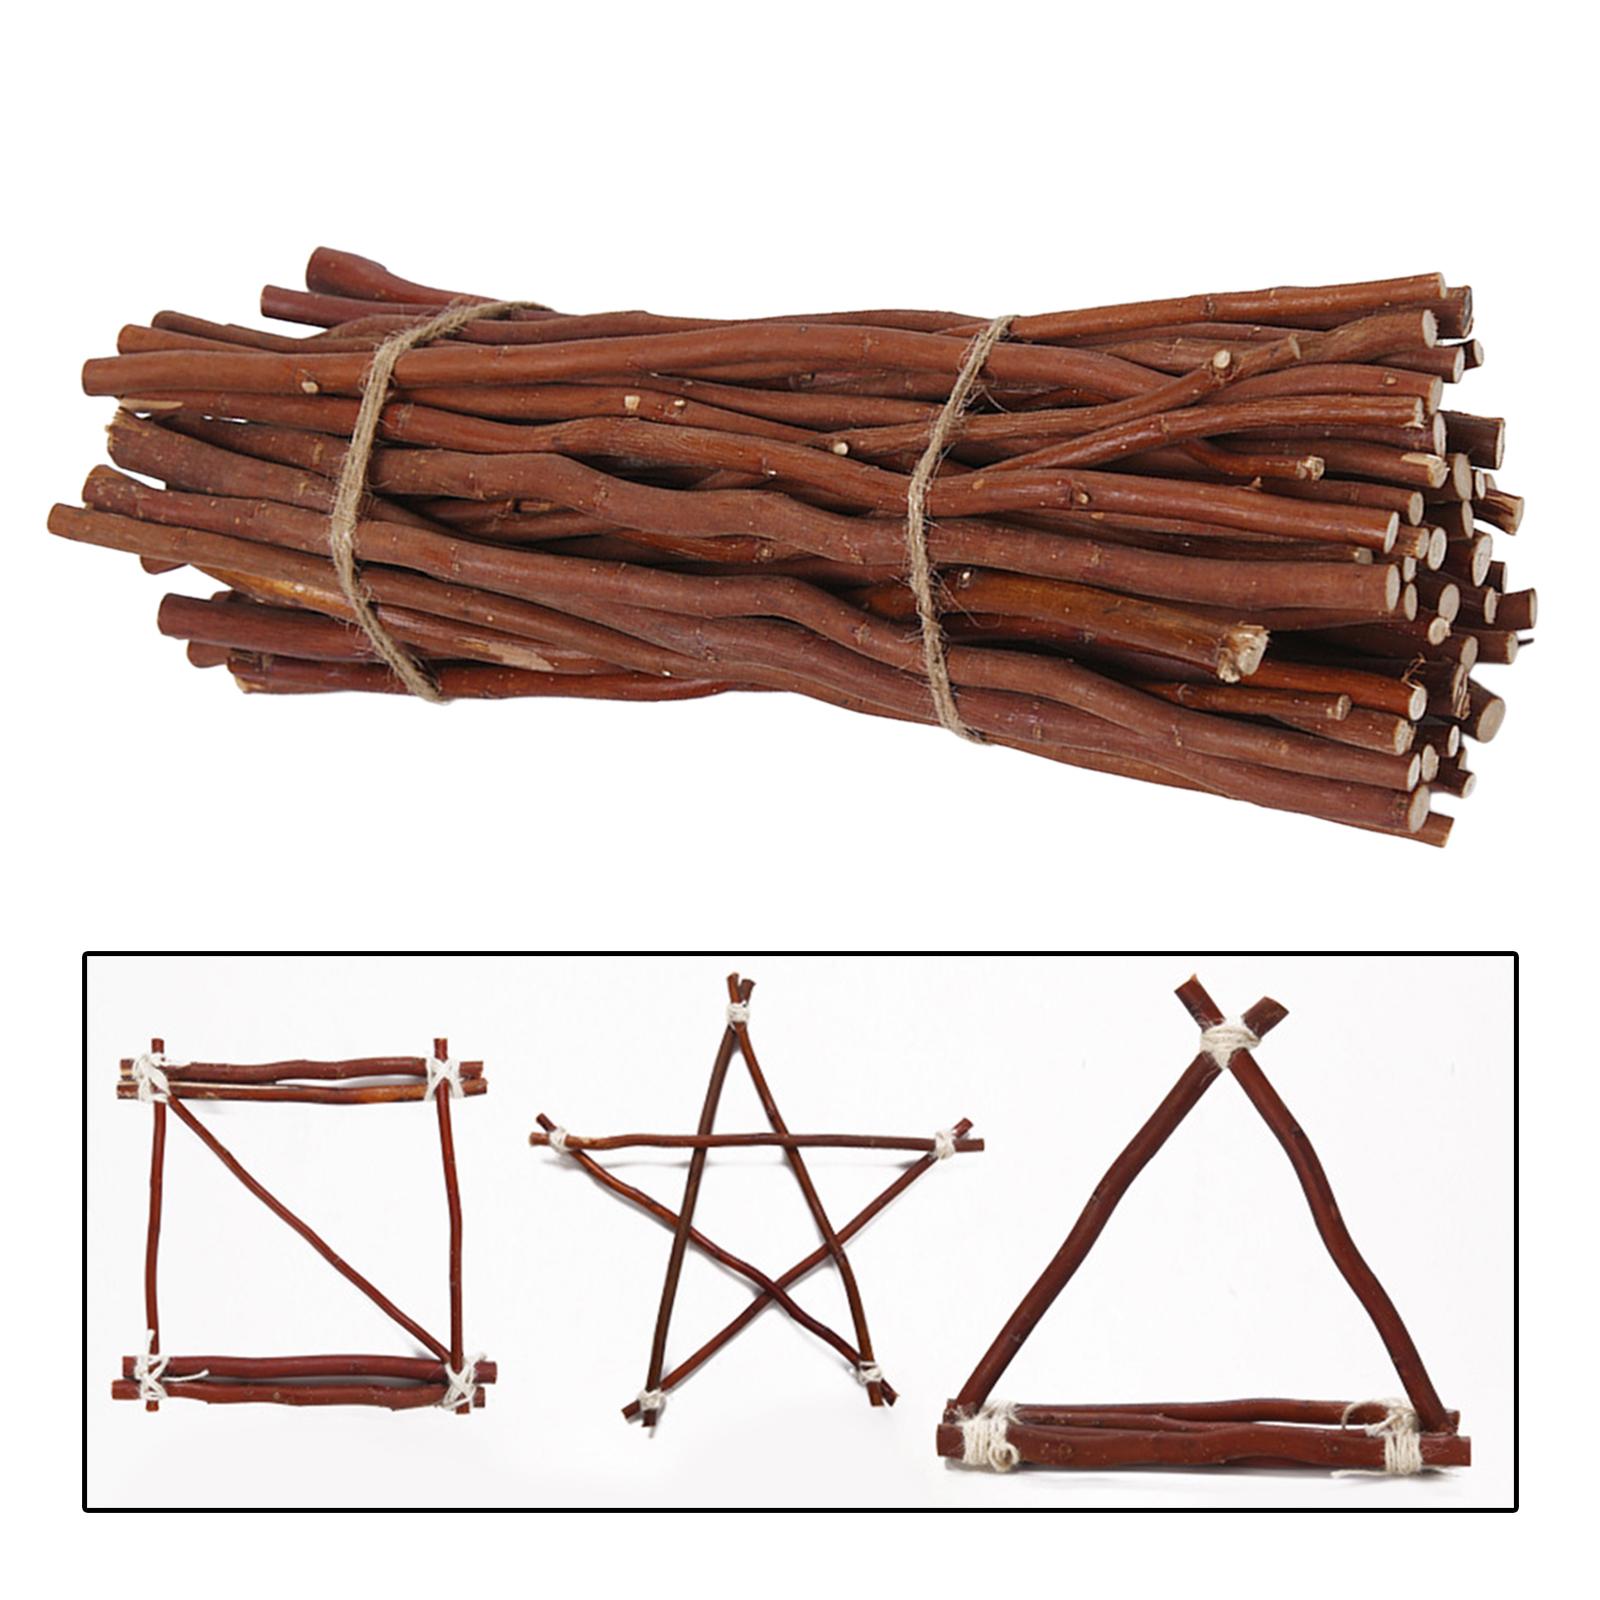 Dry Branches, Wood Sticks Natural Creative Decorative Twigs Toy for  Christmas Wedding Arrangements Garden DIY School Projects Decoration , 50  Thin 30cm Brown 